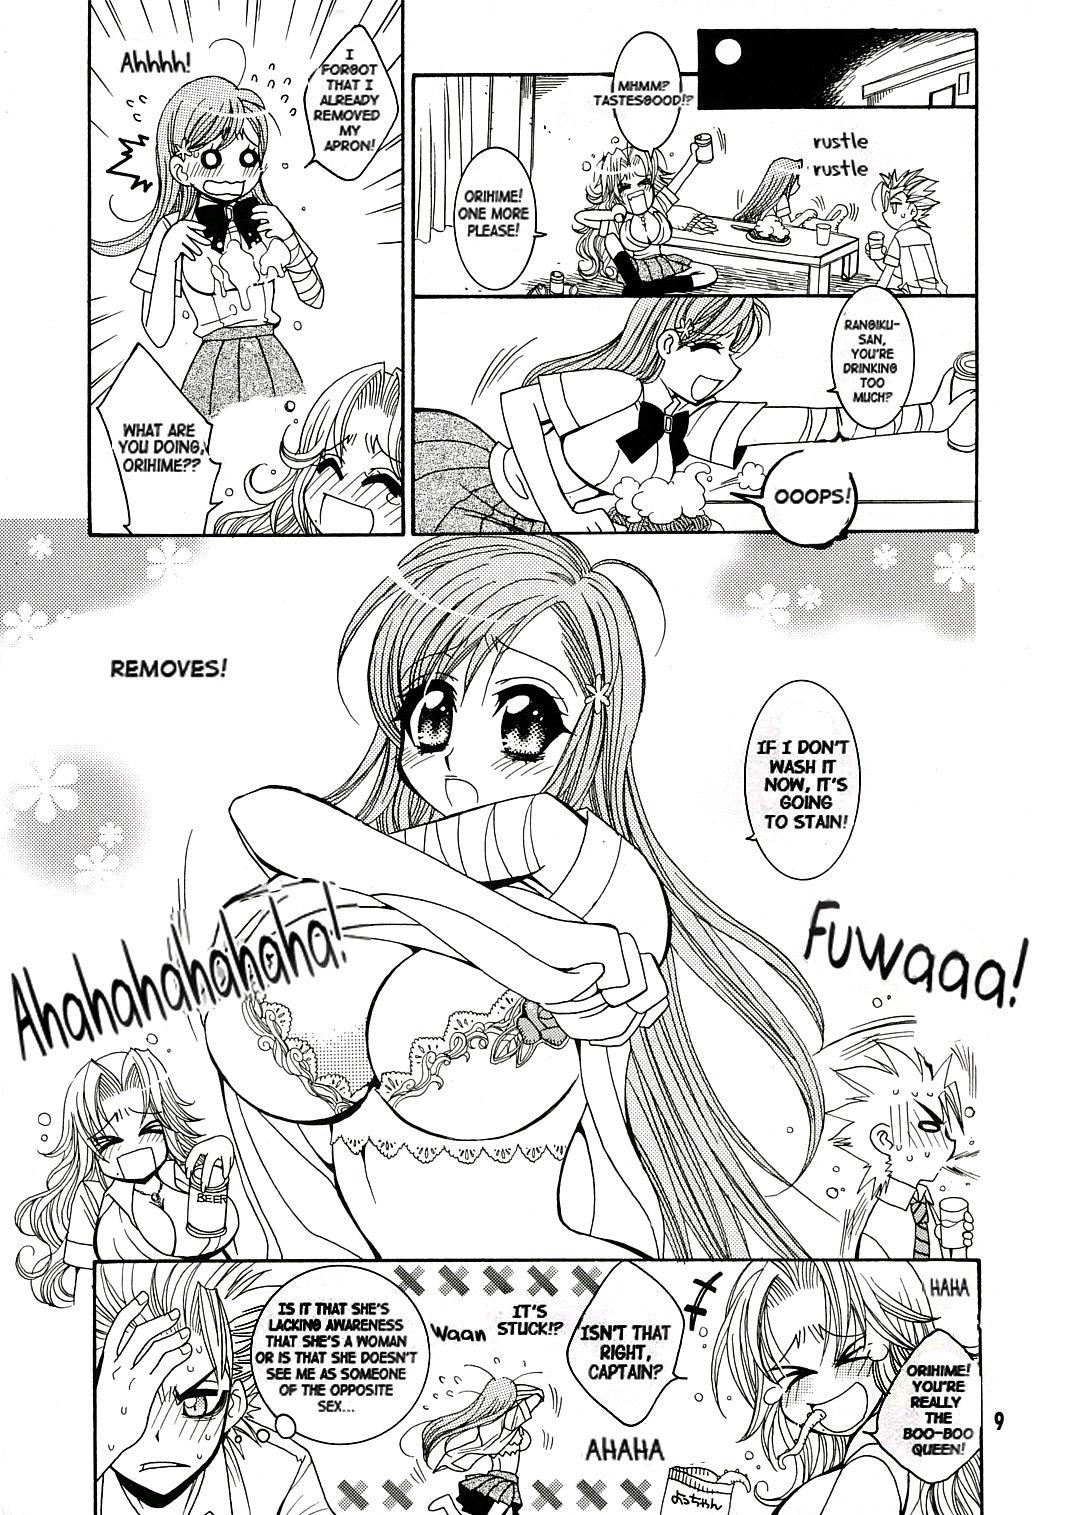 Private Sex BABY BLUE! - Bleach Hard Core Sex - Page 8